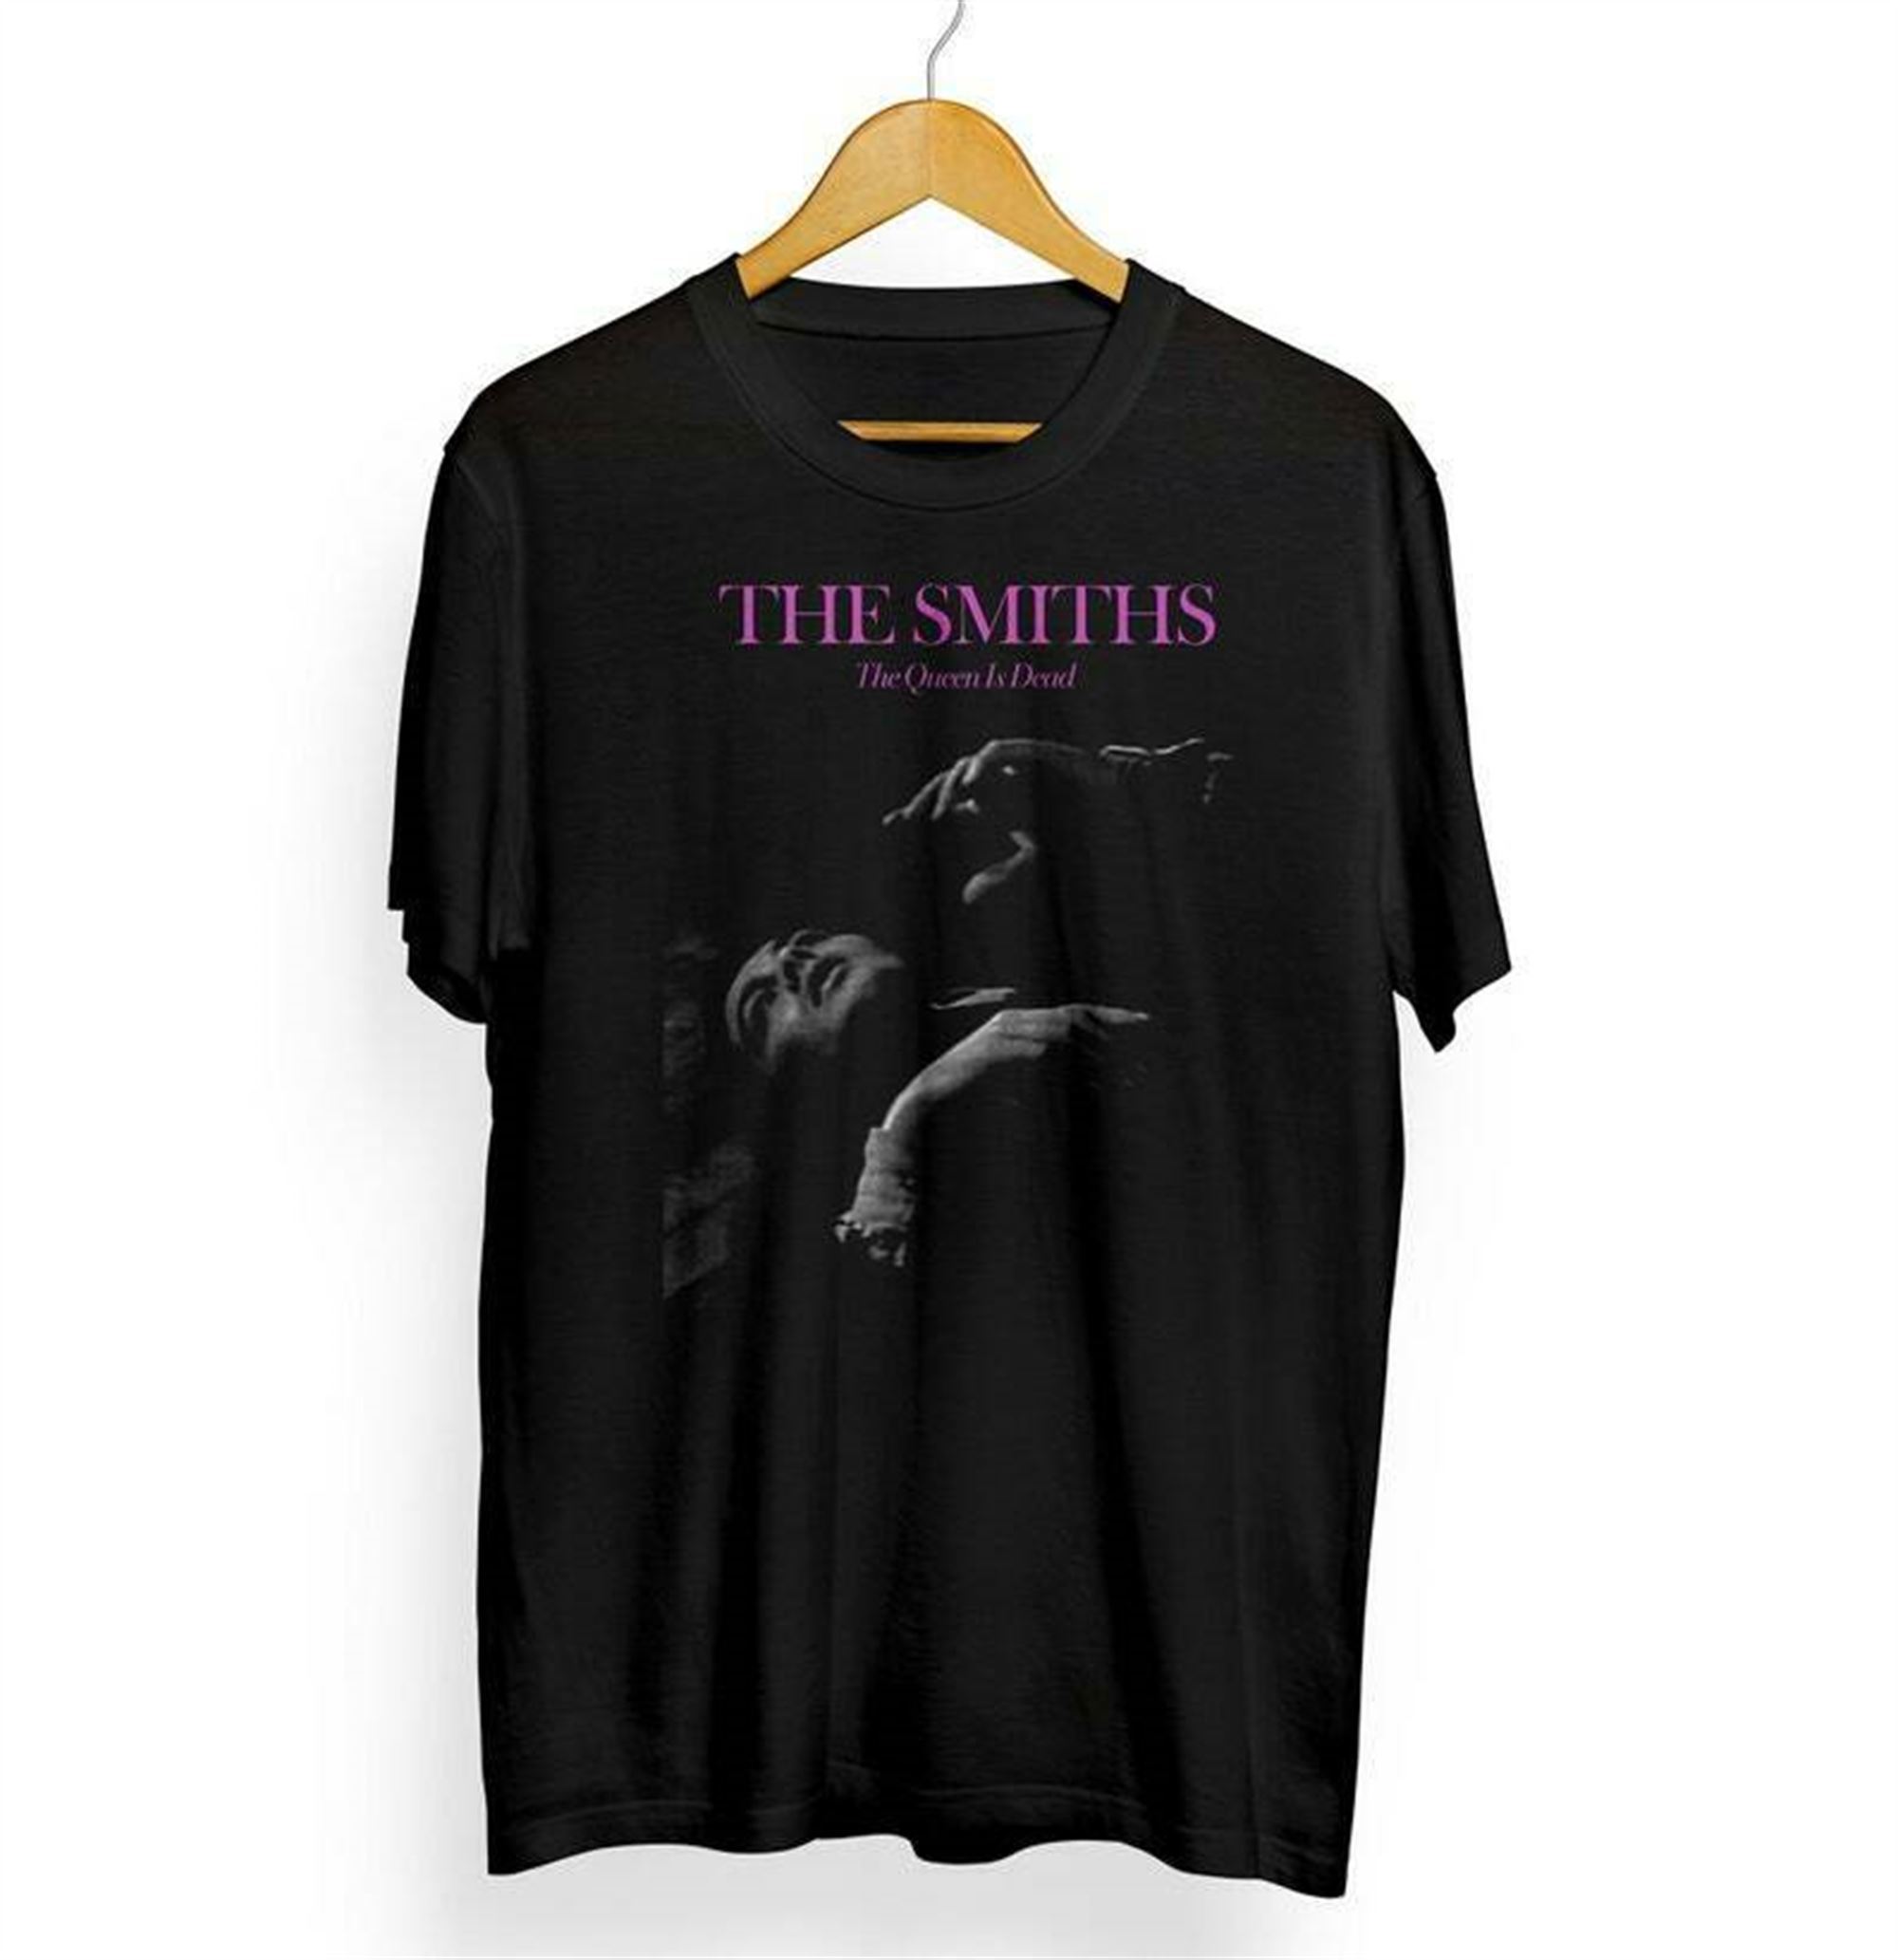 The Smiths Shirt The Queen Is Dead Shirt The Smiths Unisex Vintage T-shirt 2